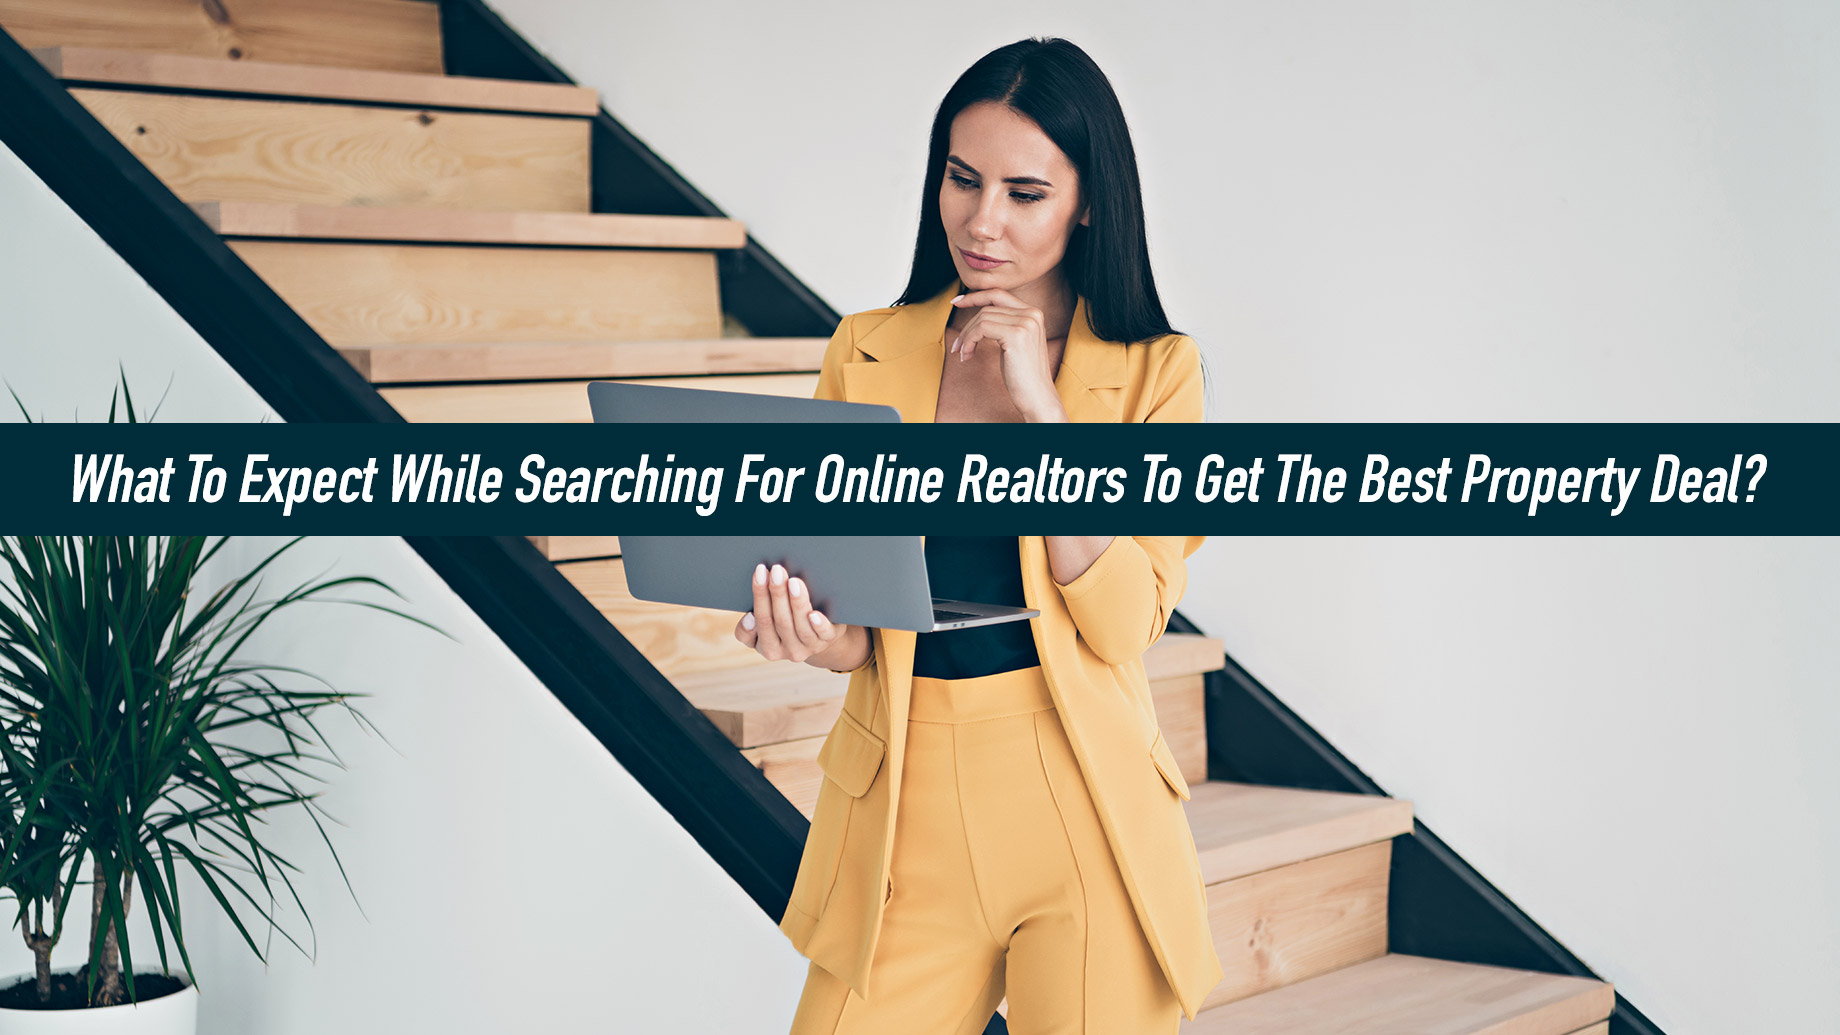 What To Expect While Searching For Online Realtors To Get The Best Property Deal?